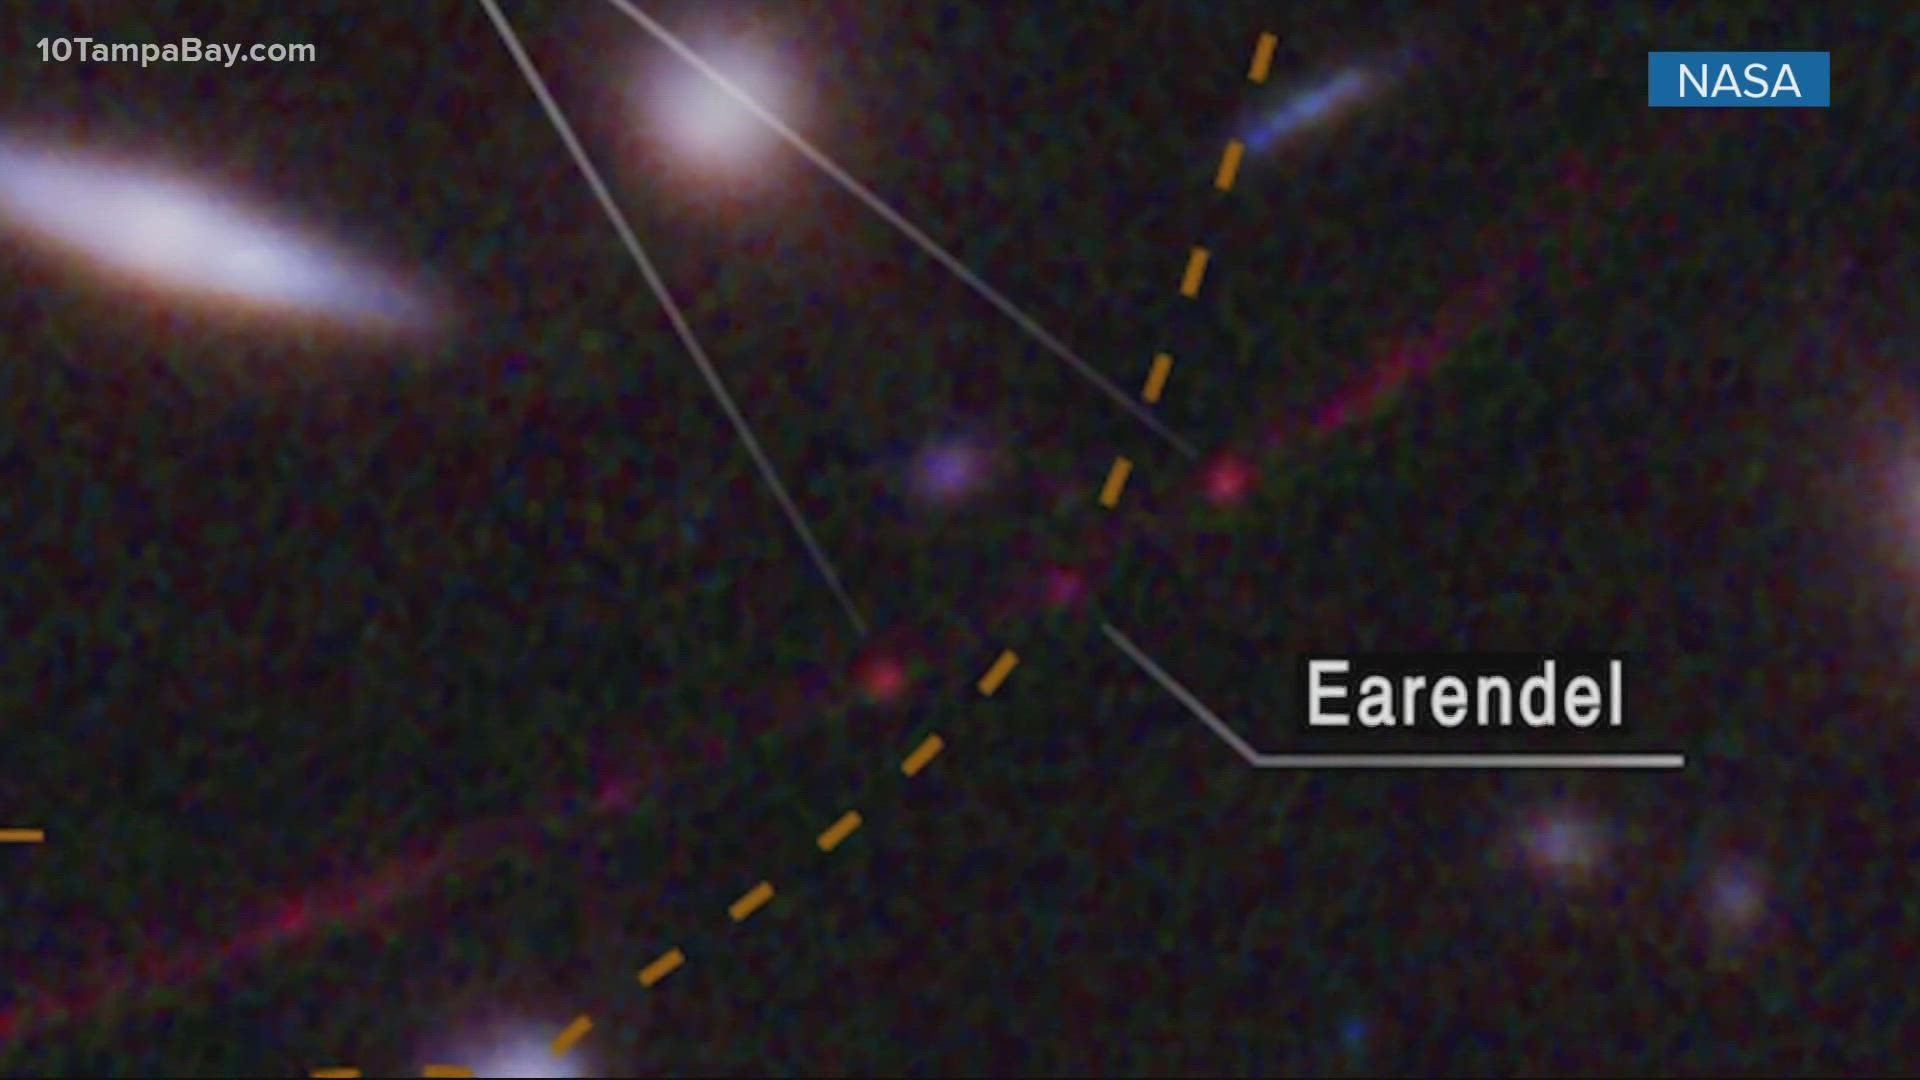 Experts say light from "Earendel" took 12.9 billion years to reach Earth.